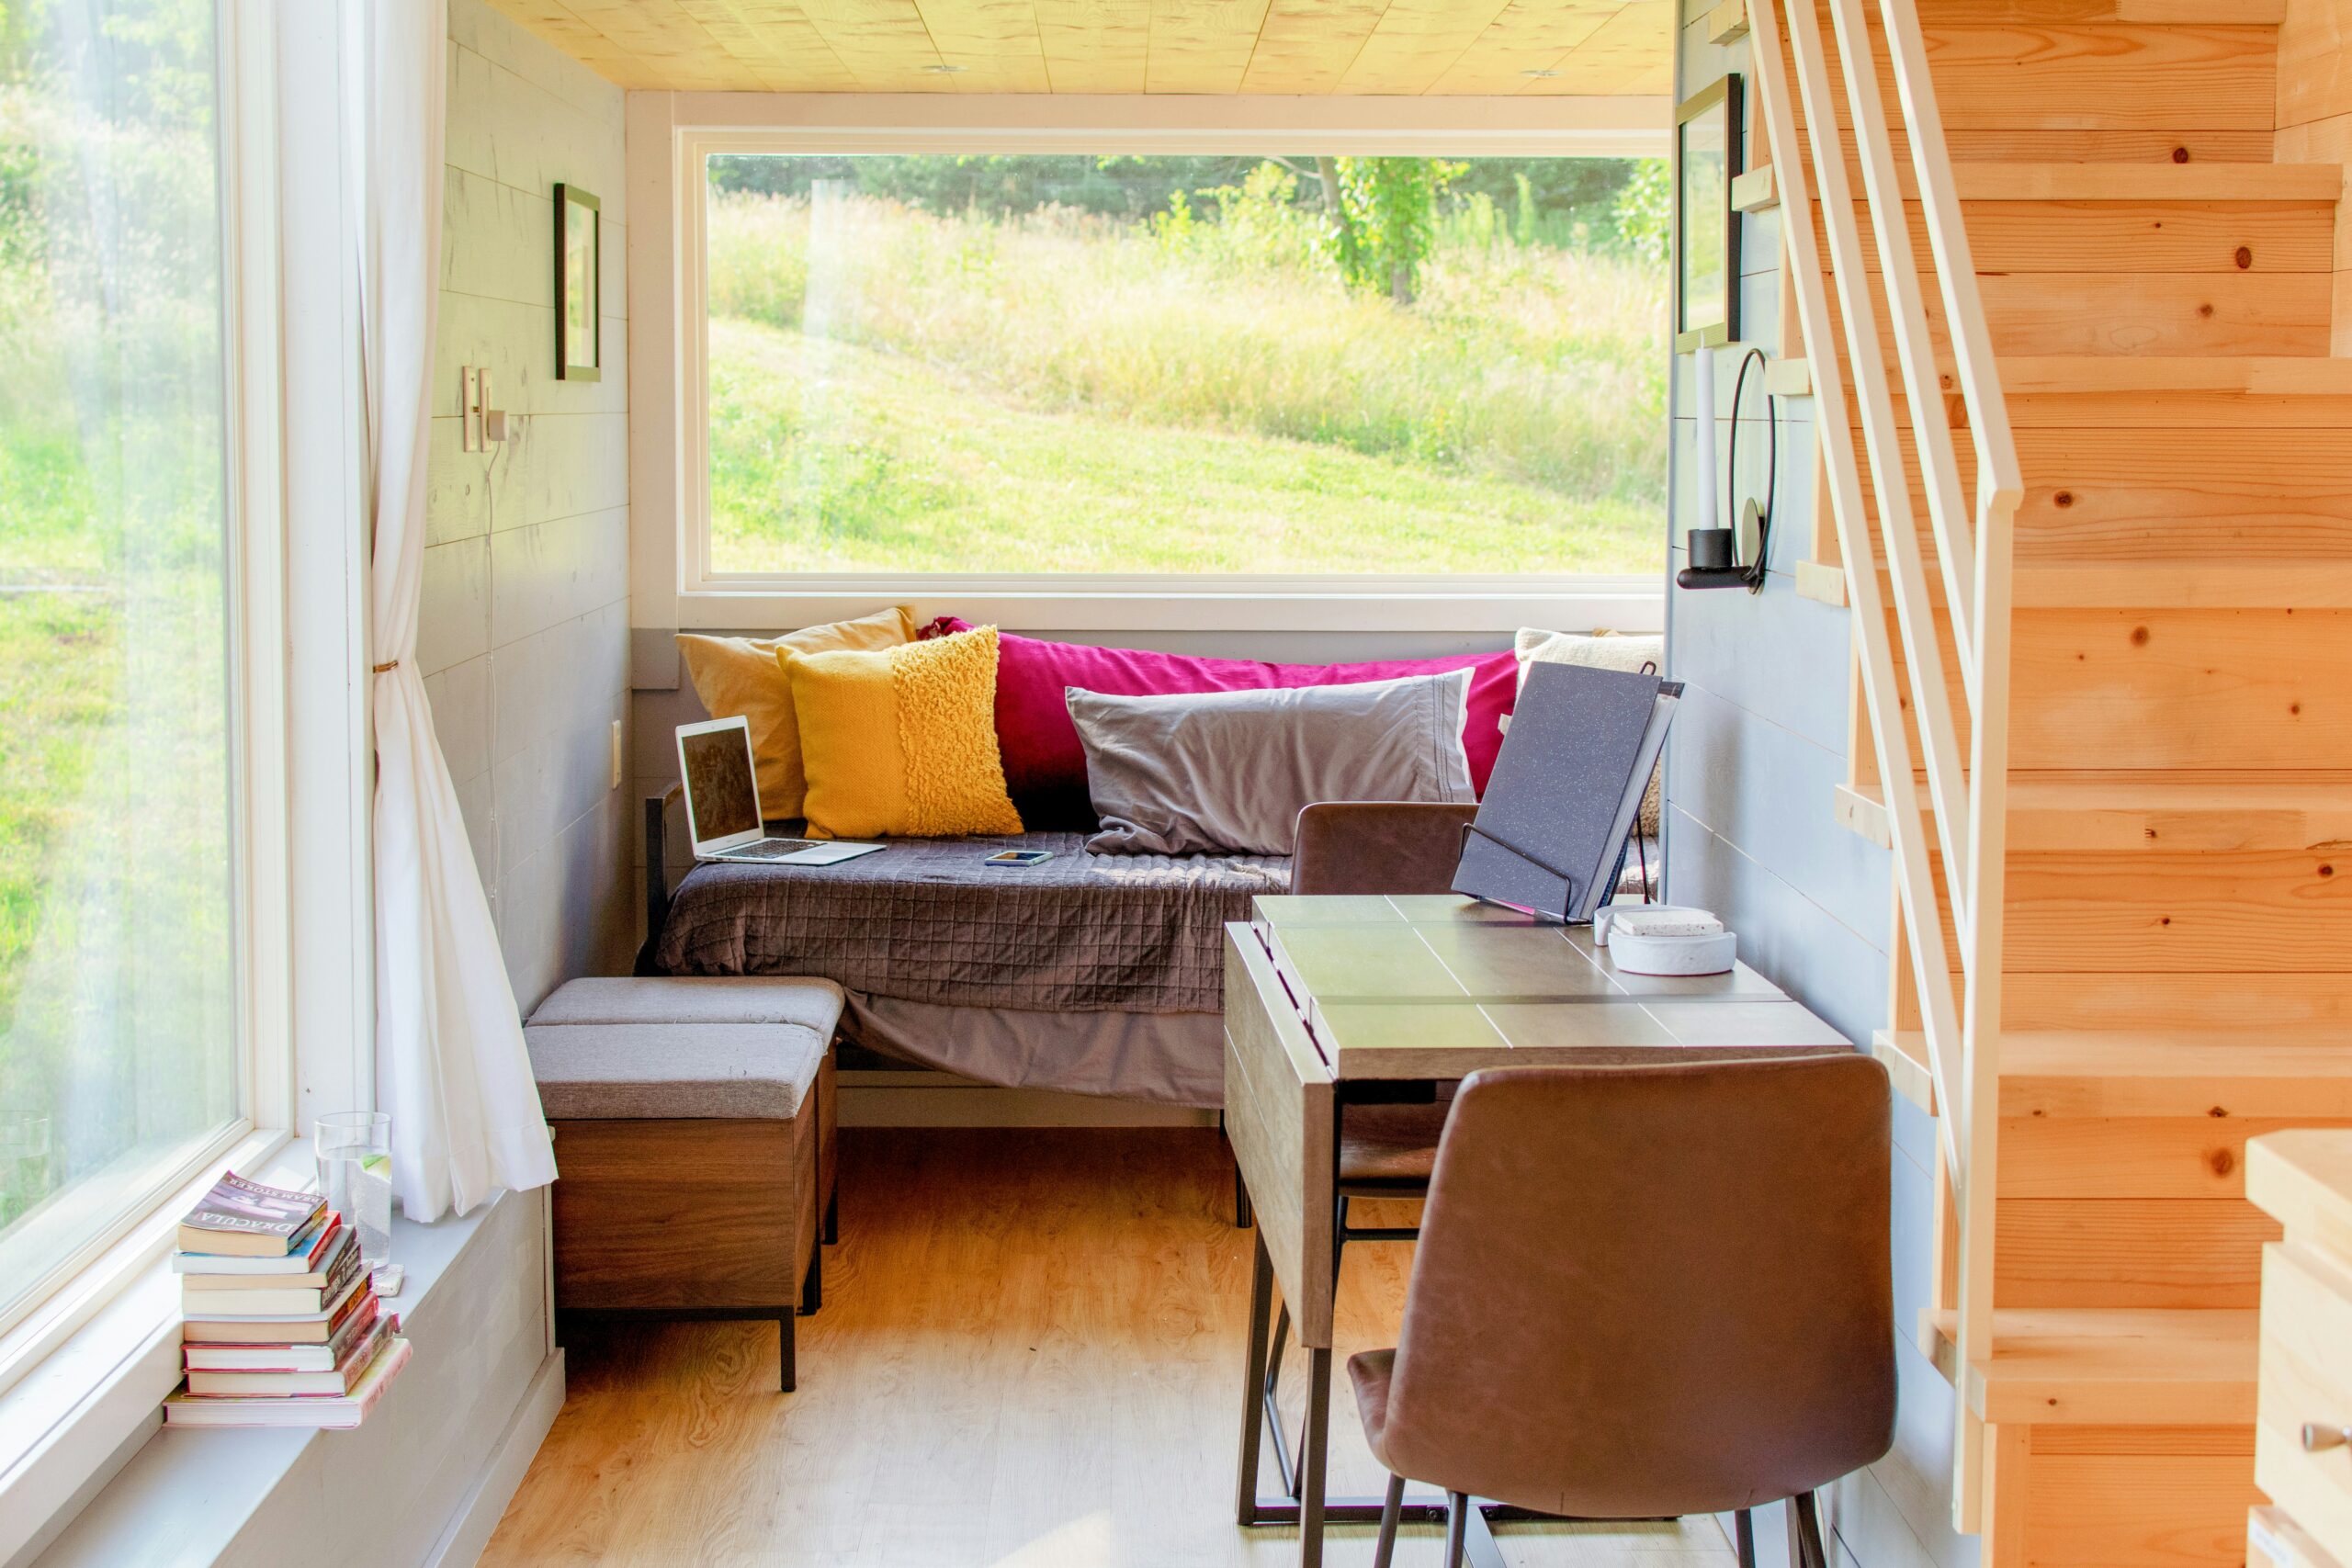 Are Amazon Tiny House Kits worth it? Here are the benefits of a tiny home. Pictured: The inside of a tiny house